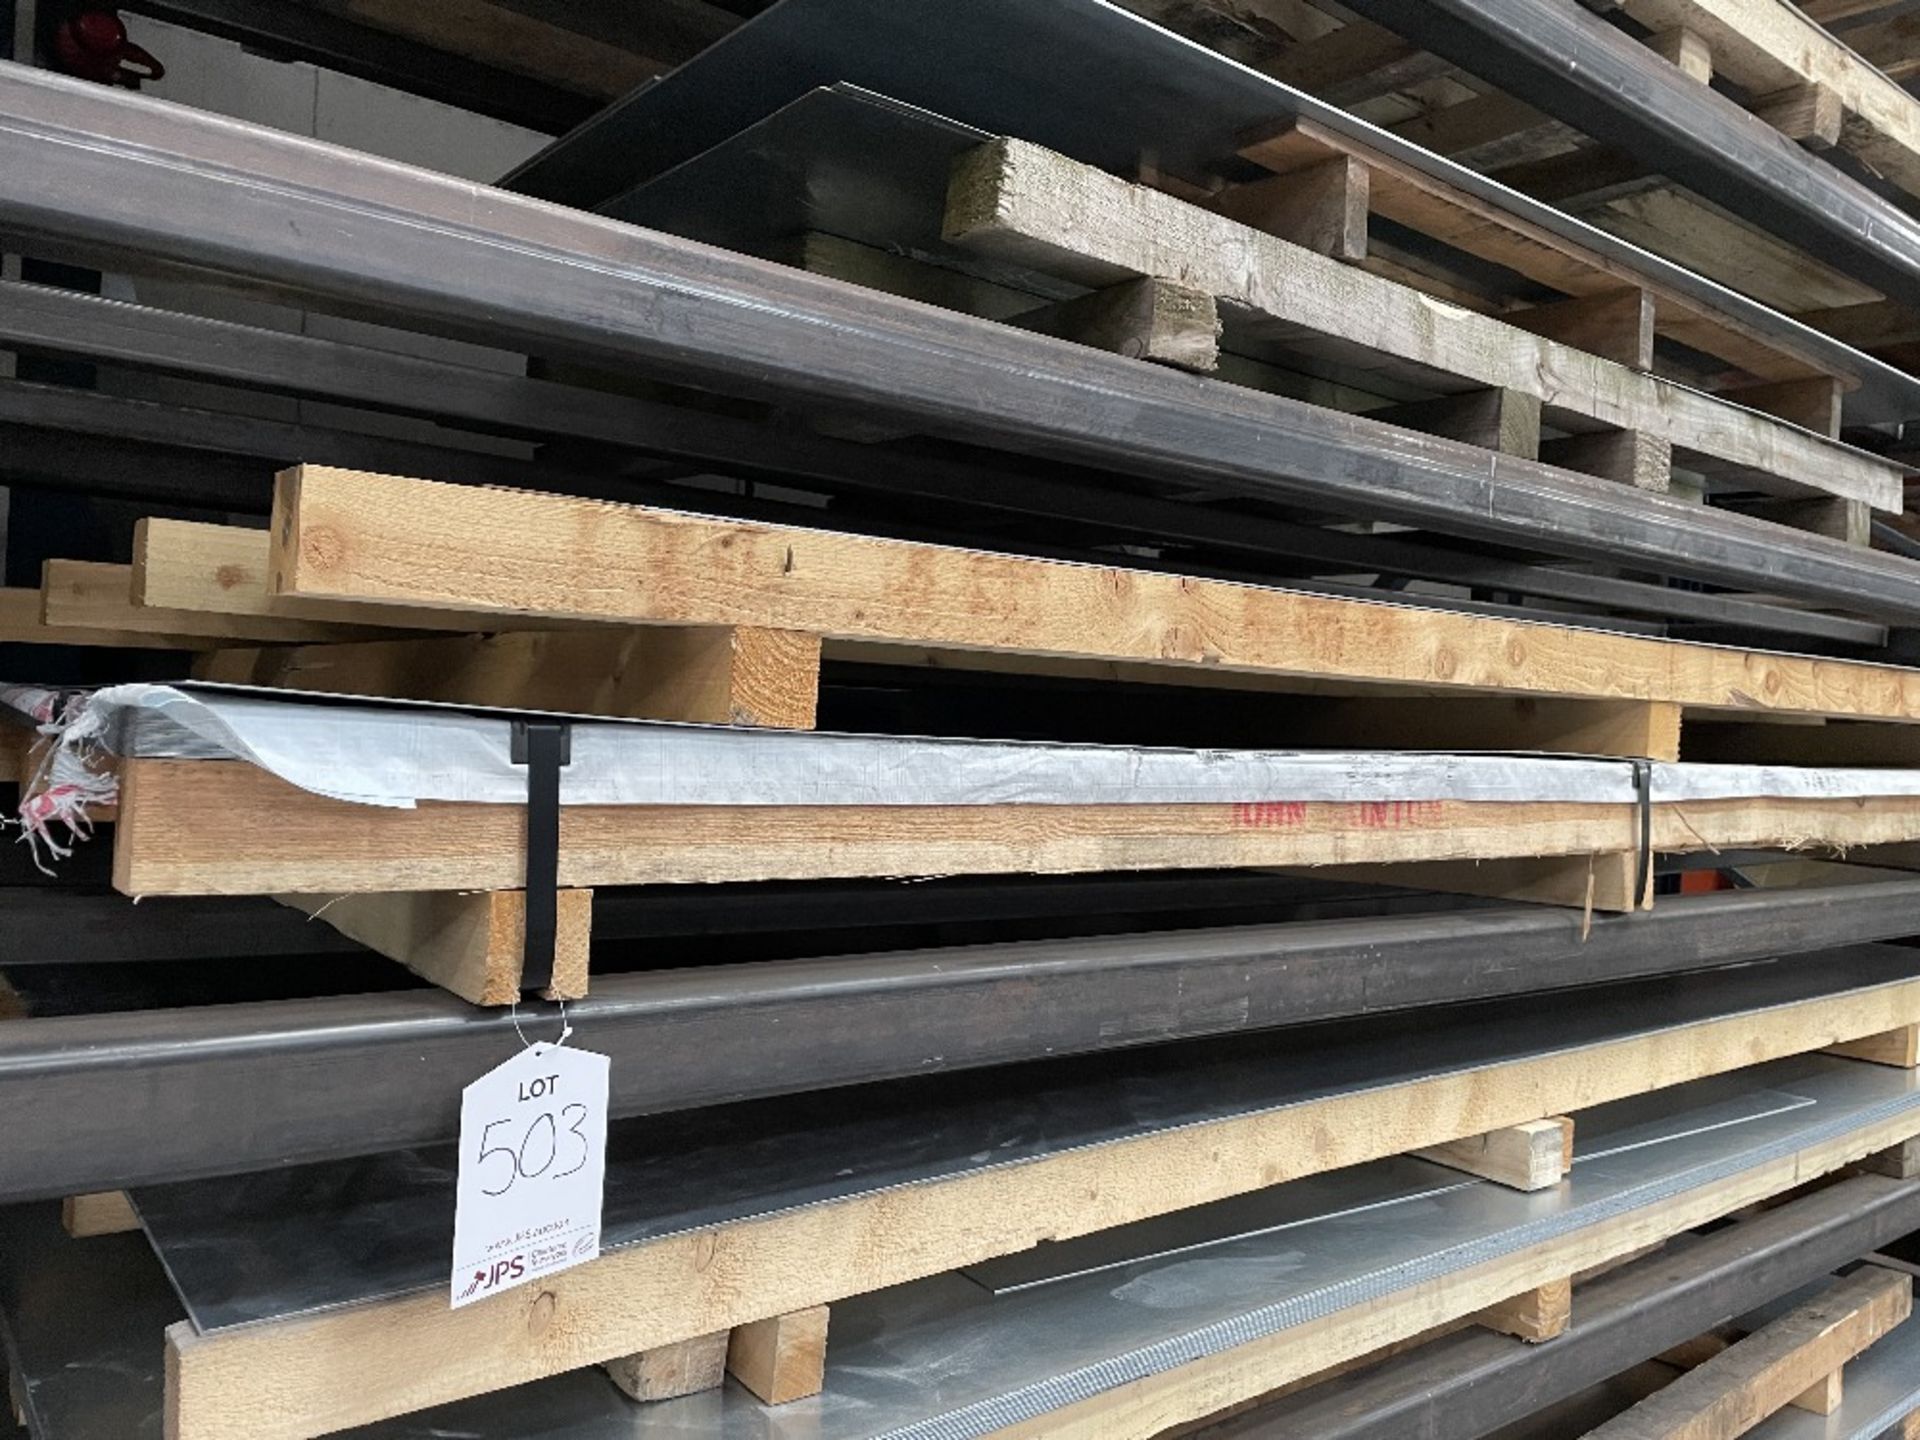 26 x 1.2mm Sheets of G1.5-1.2 Galvanised Steel | Size: 300cm x 150cm